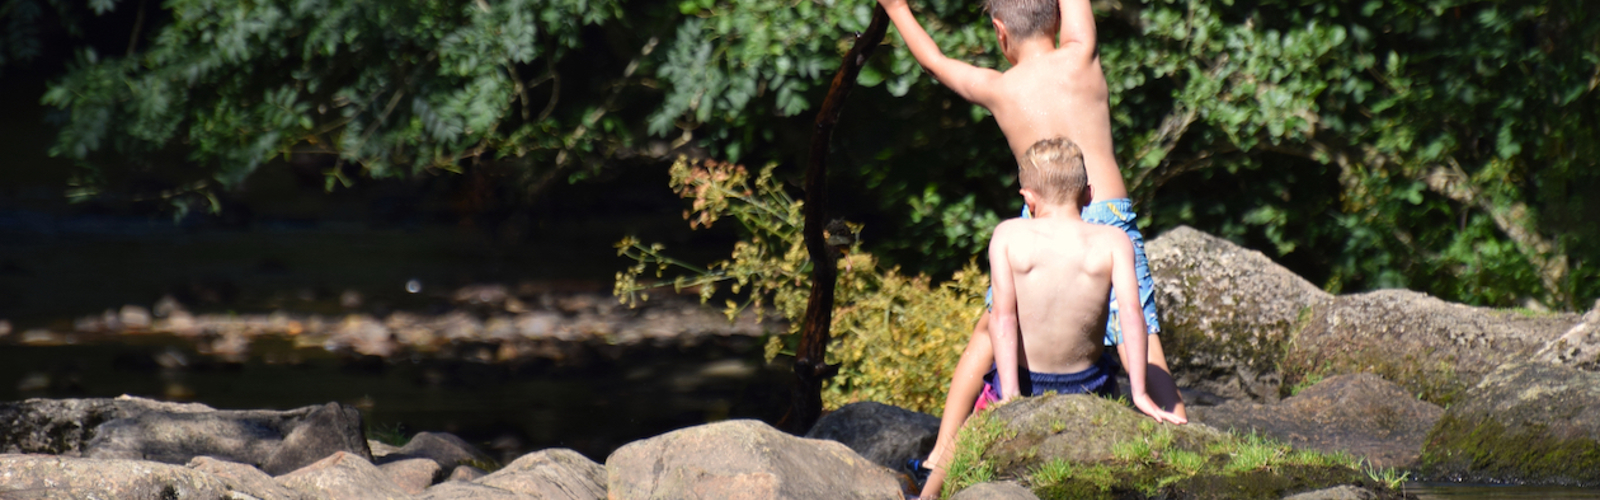 Two boys play with a large stick in a river.